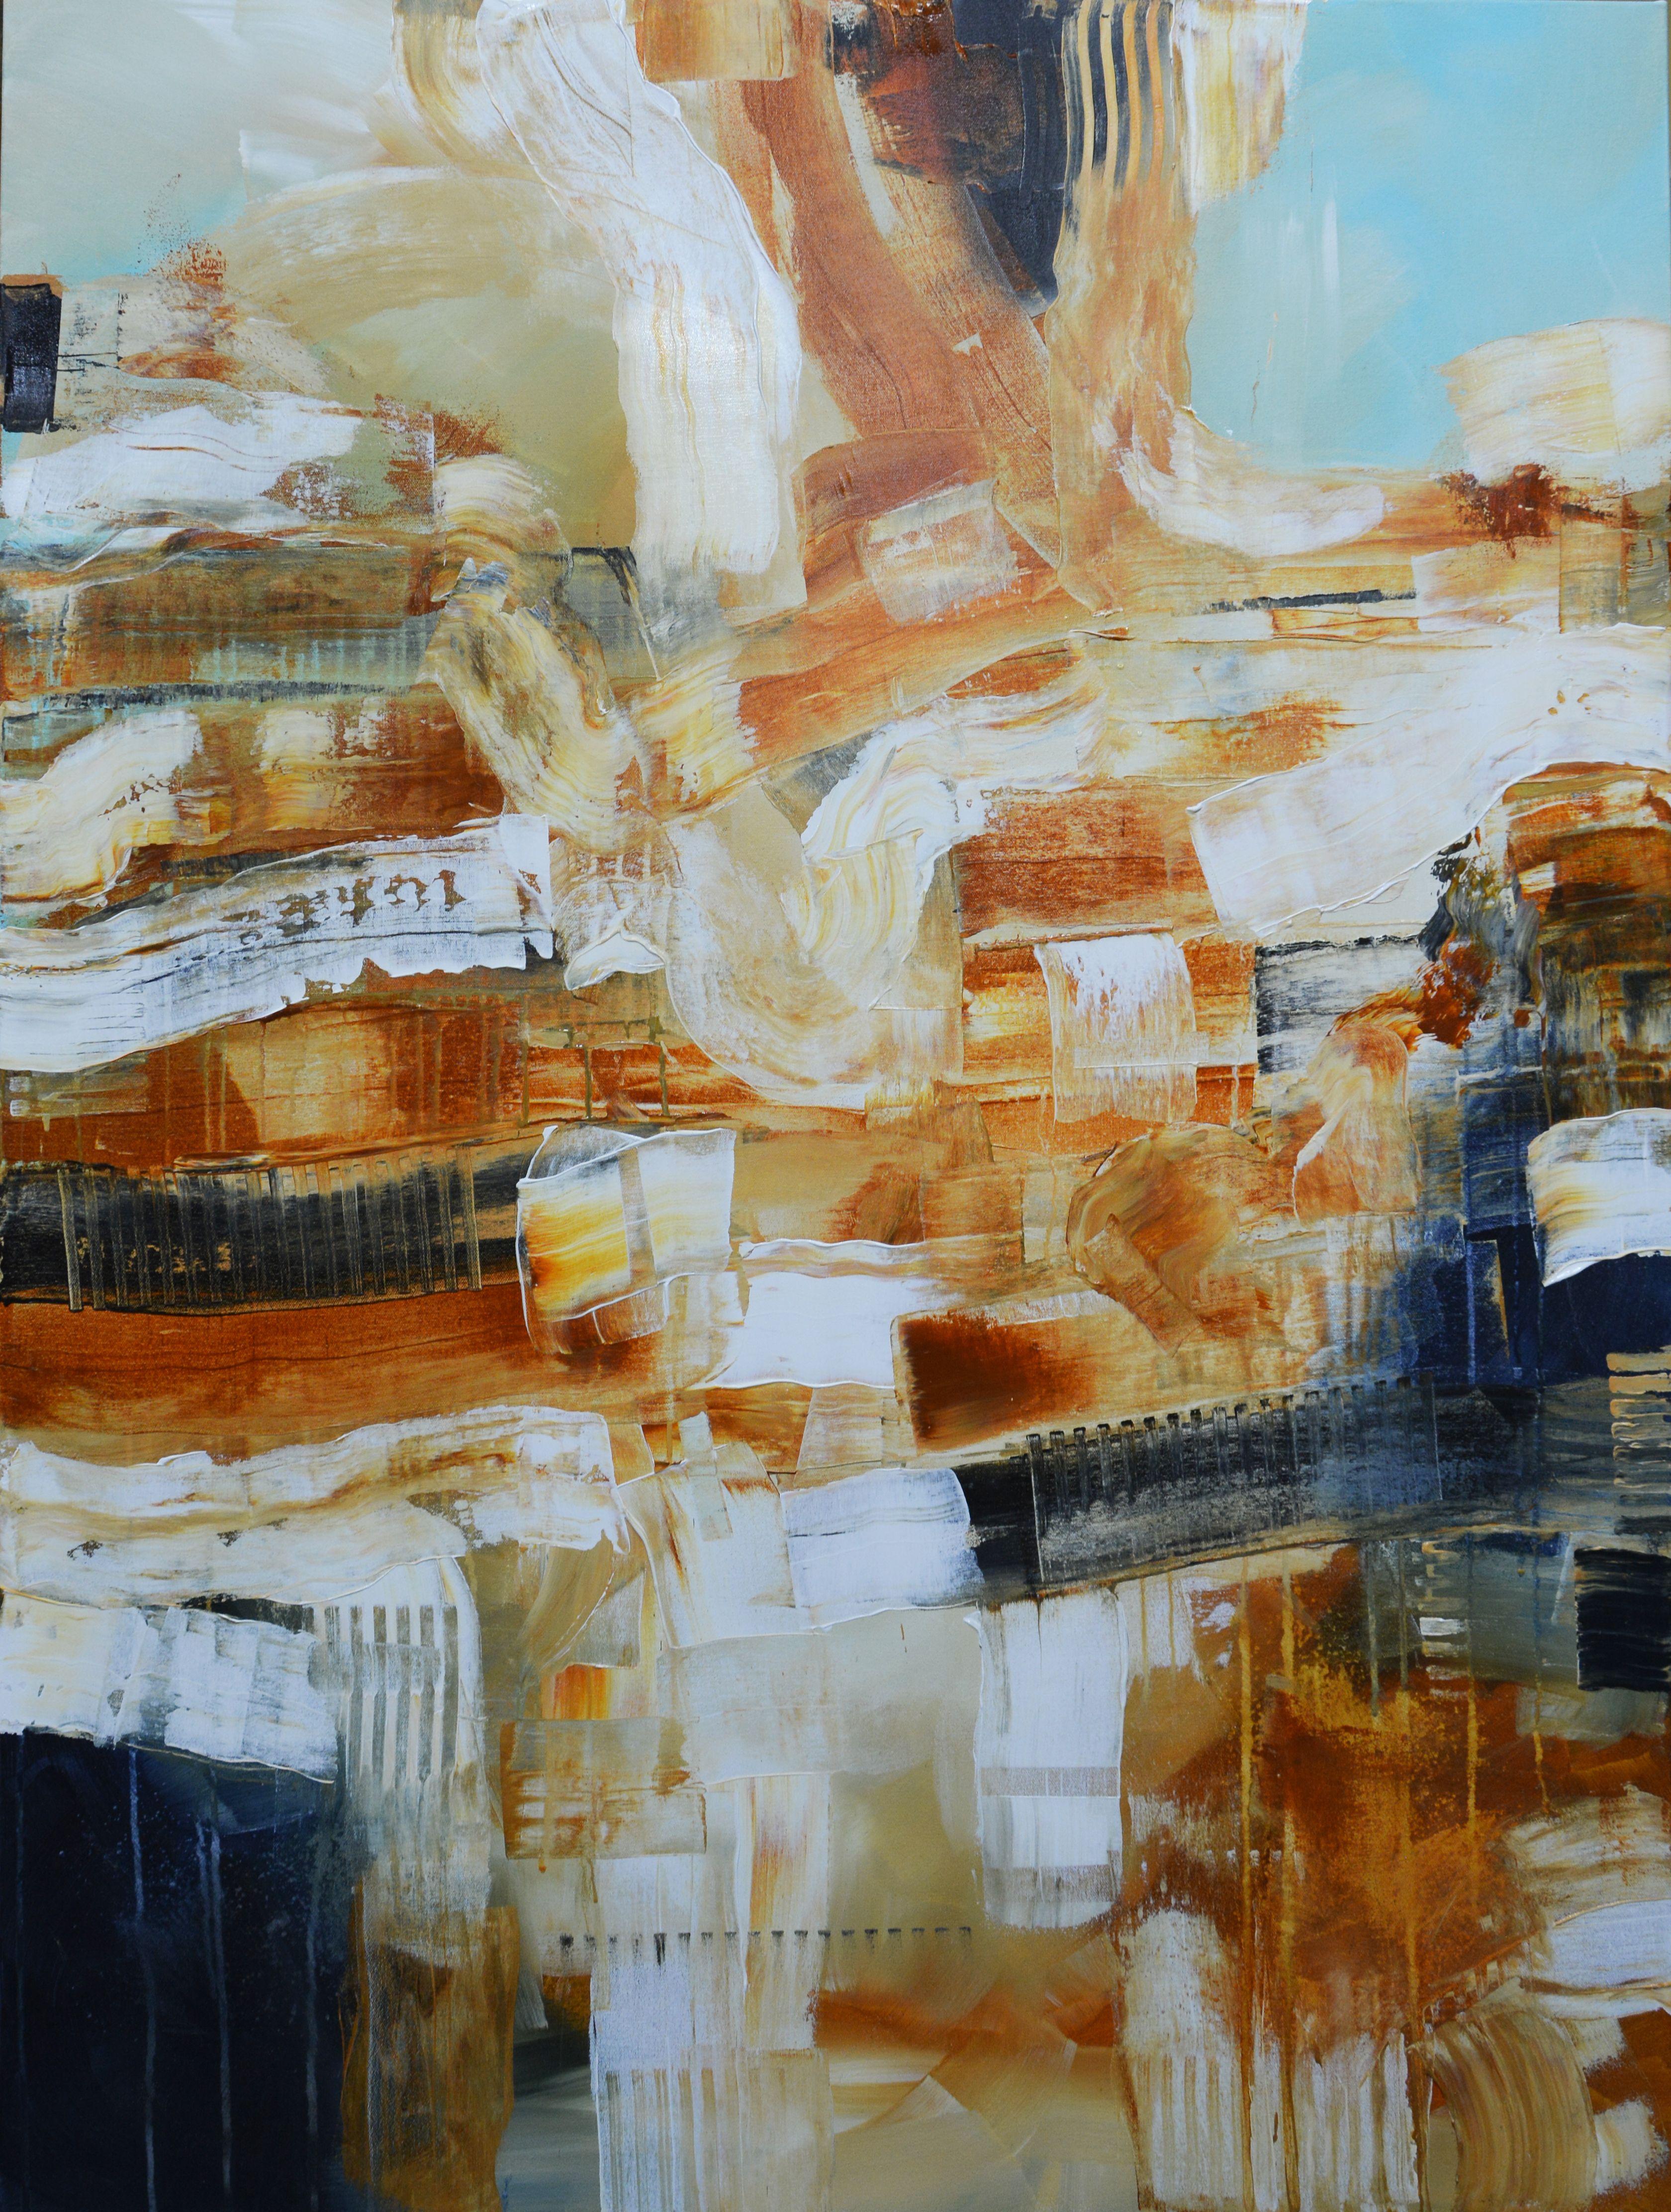 Structures series - The city under a piece of sky, Mixed Media on Canvas - Mixed Media Art by Andrada Anghel